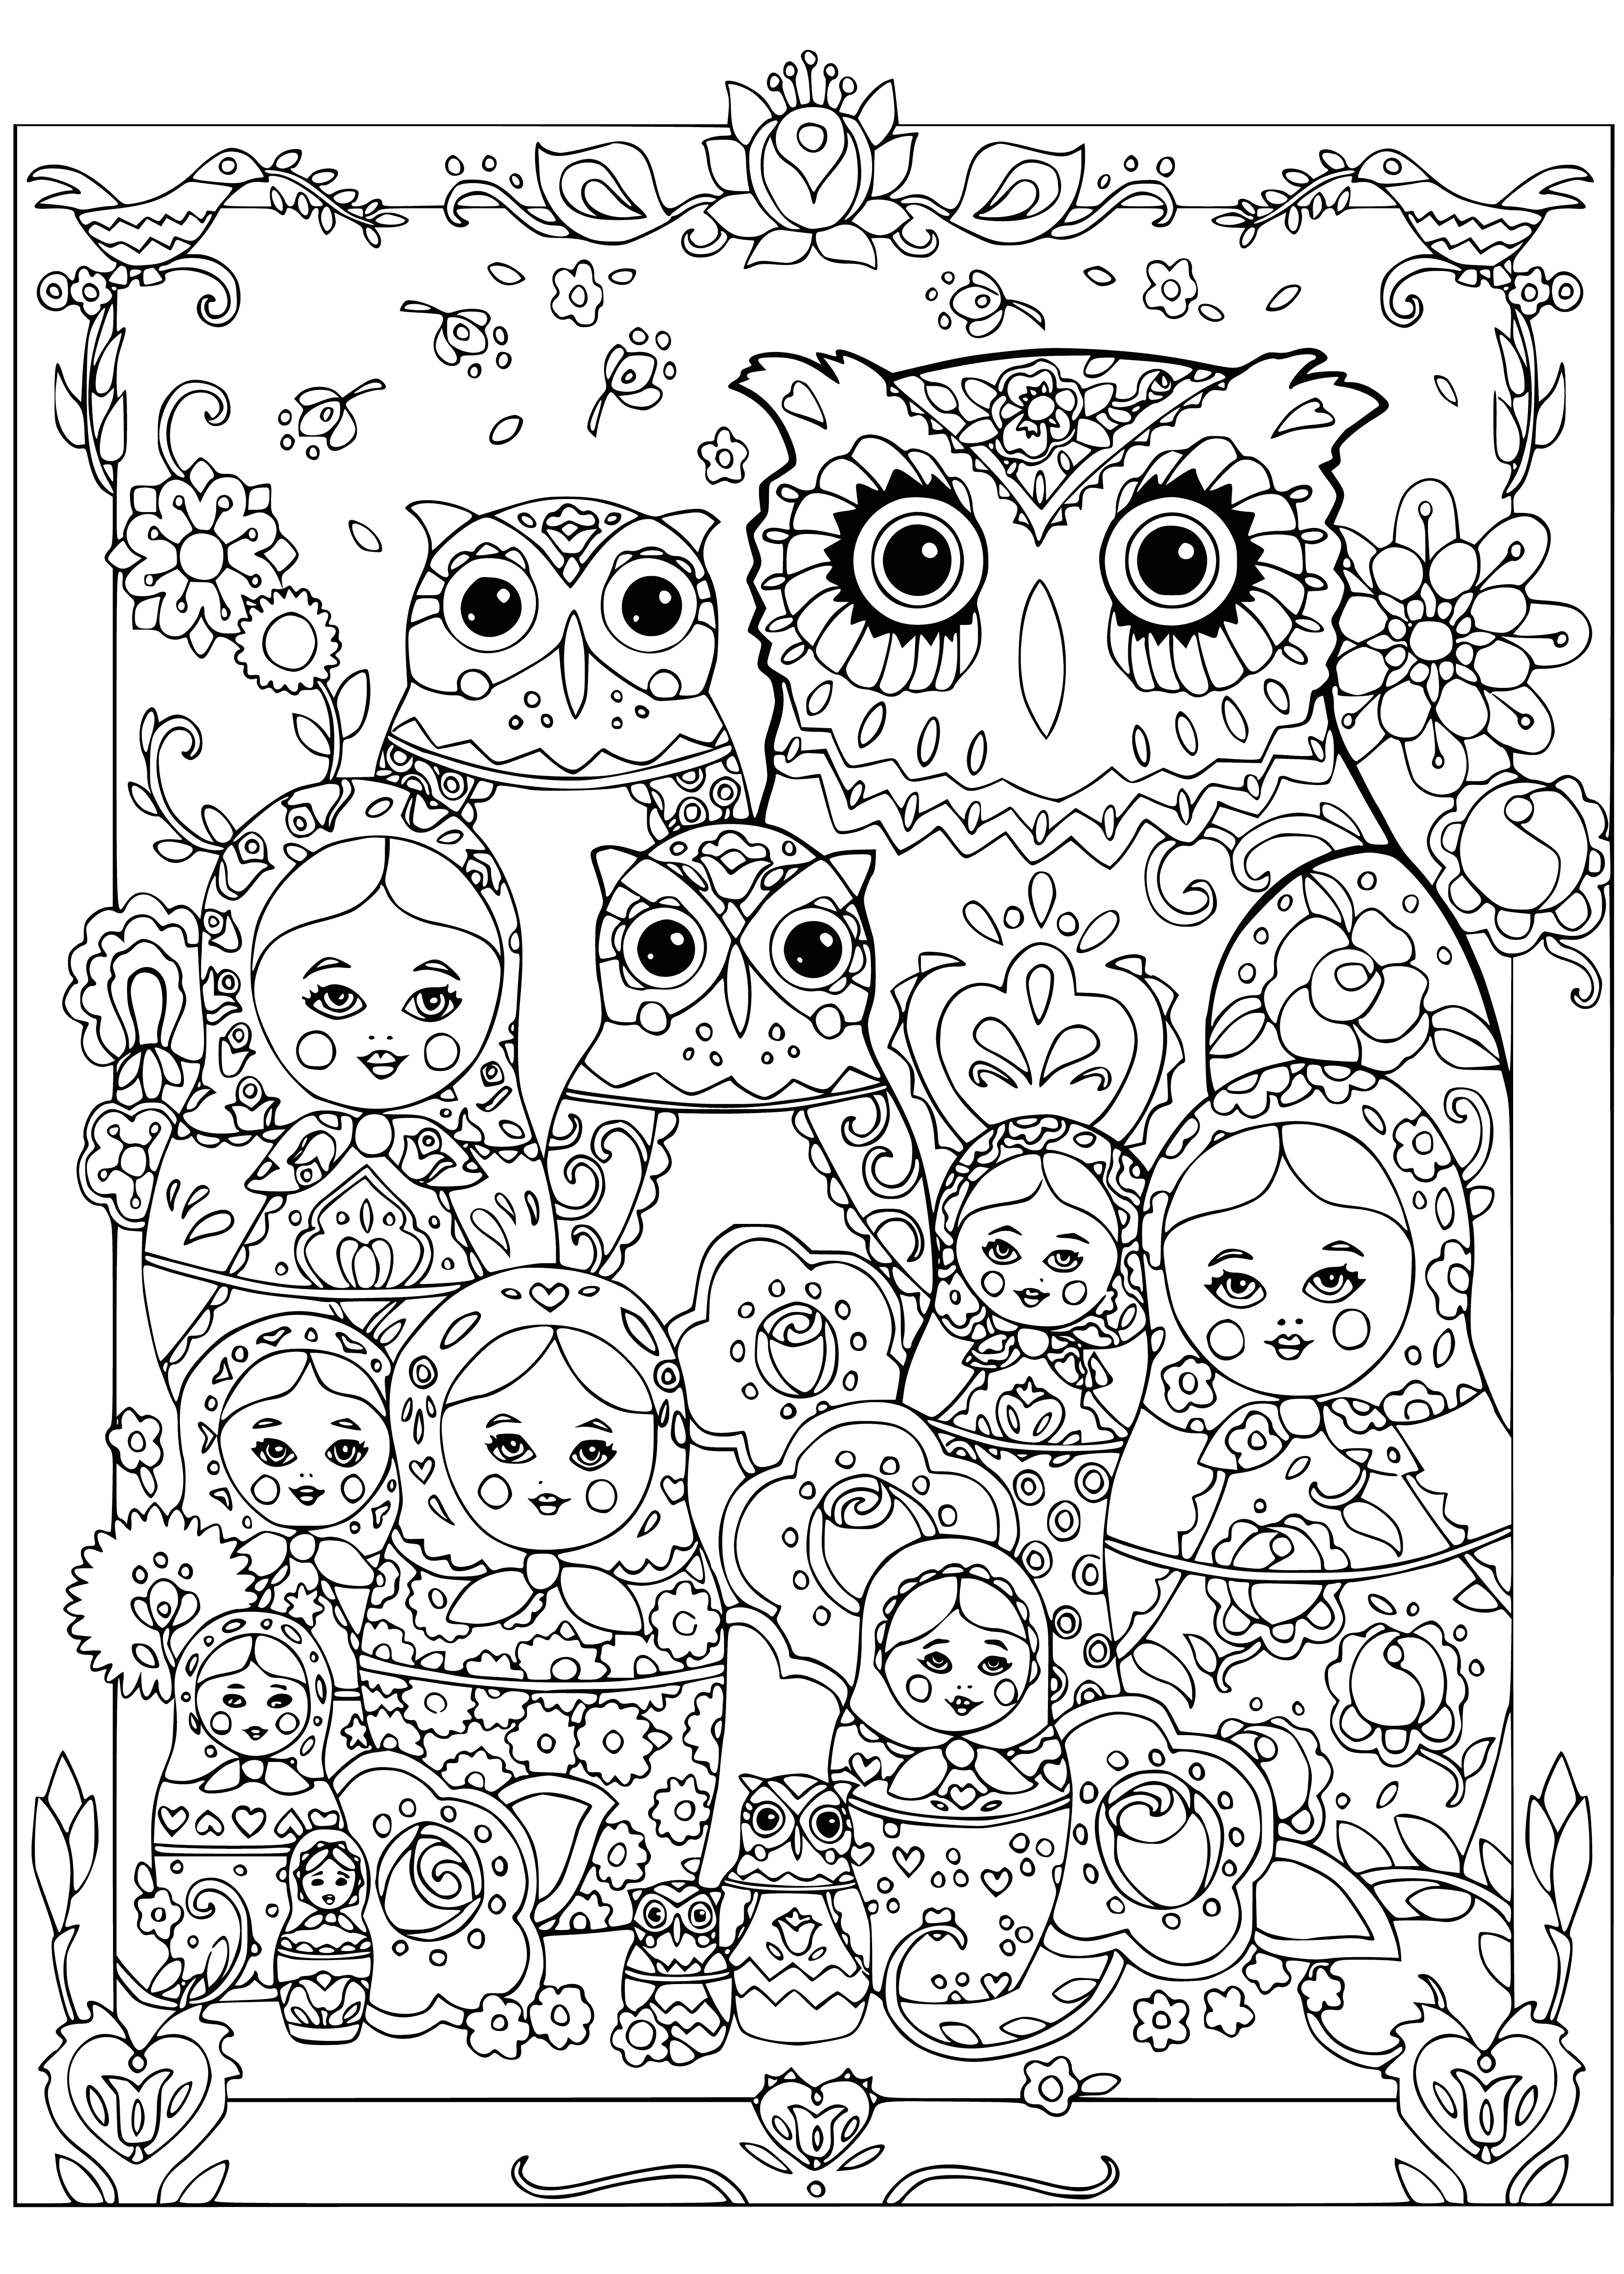 coloring page: Owls perched atop colorful nesting dolls, from large to small, with wings outstretched.